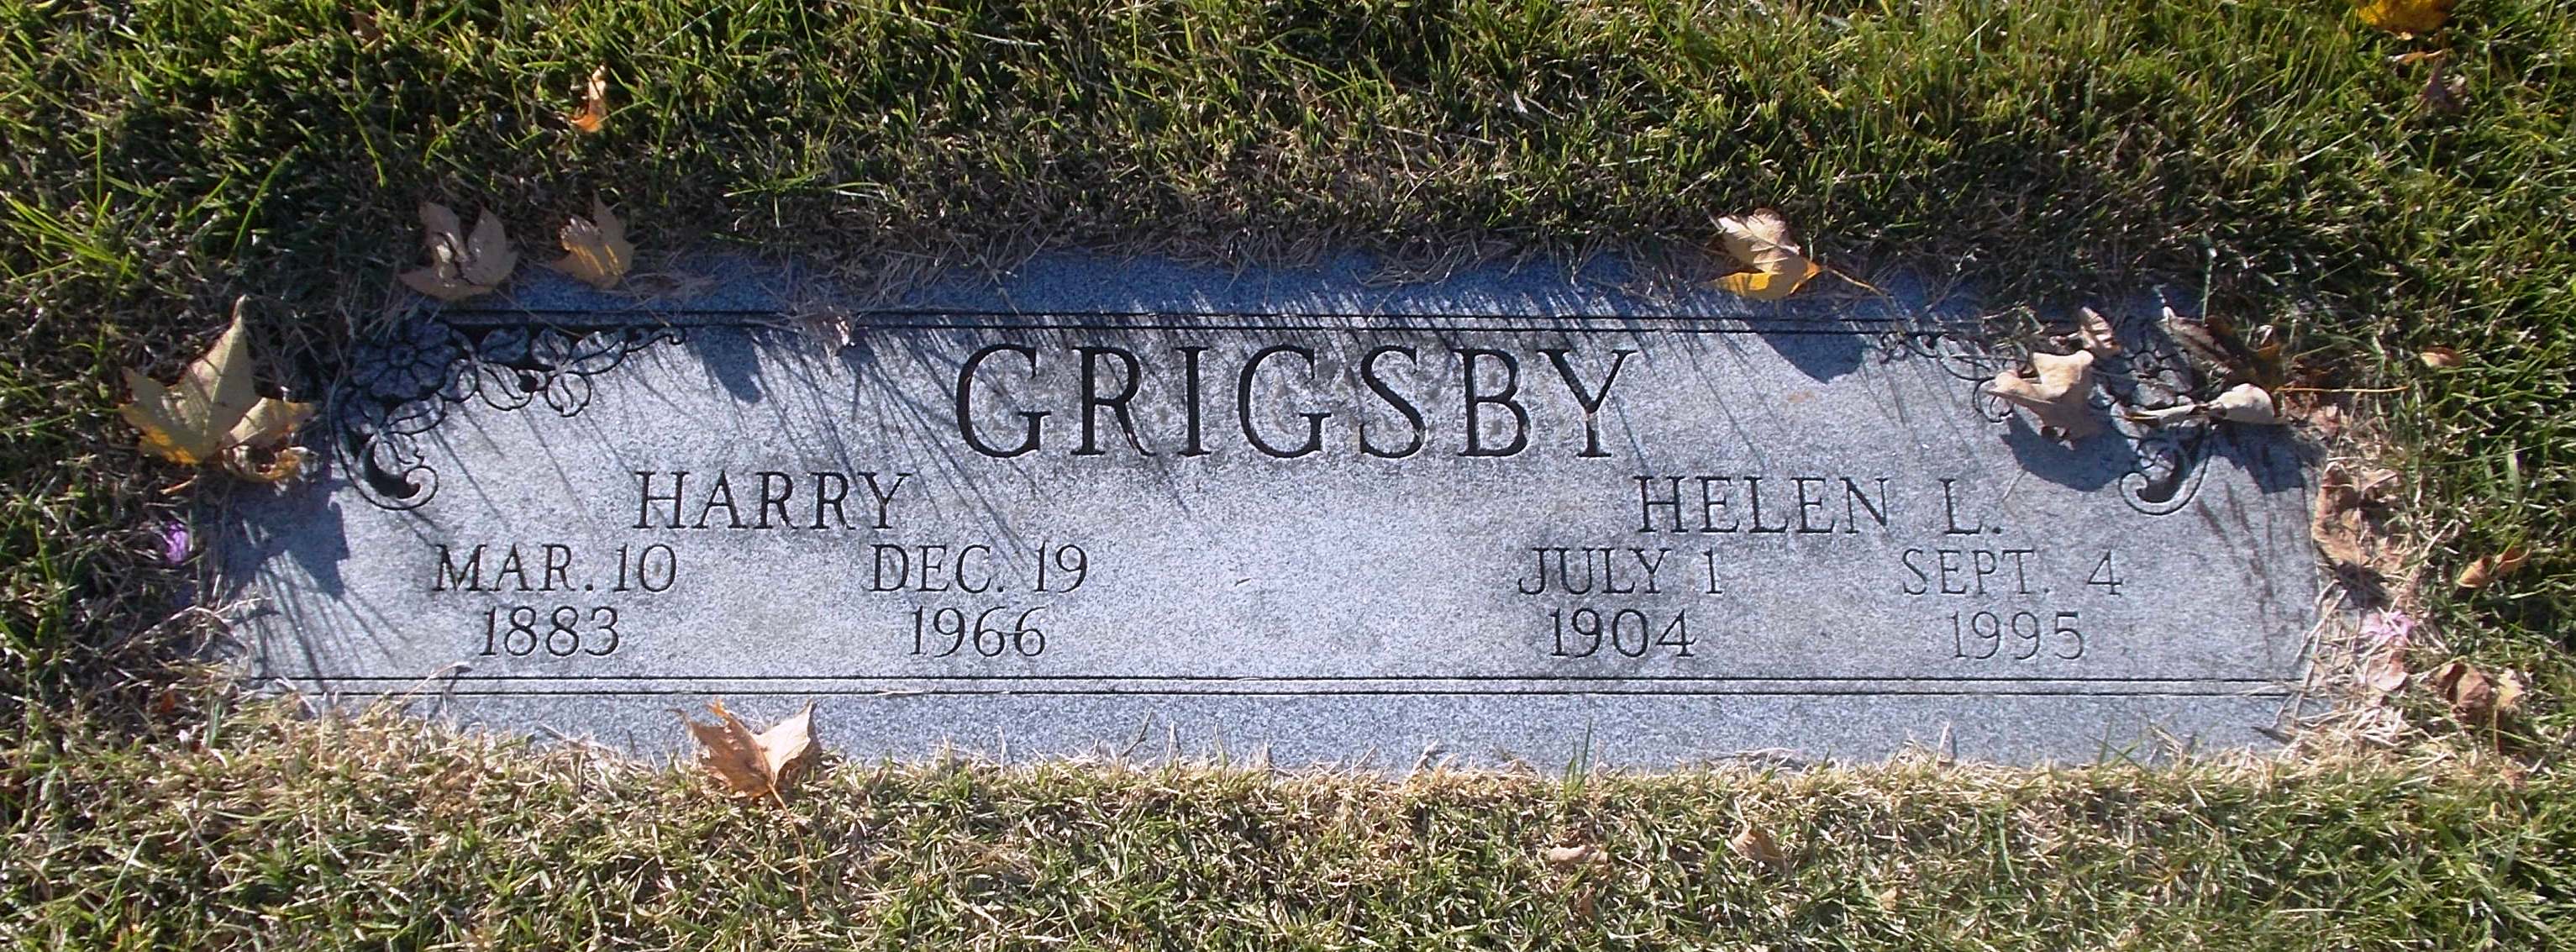 Harry Grigsby